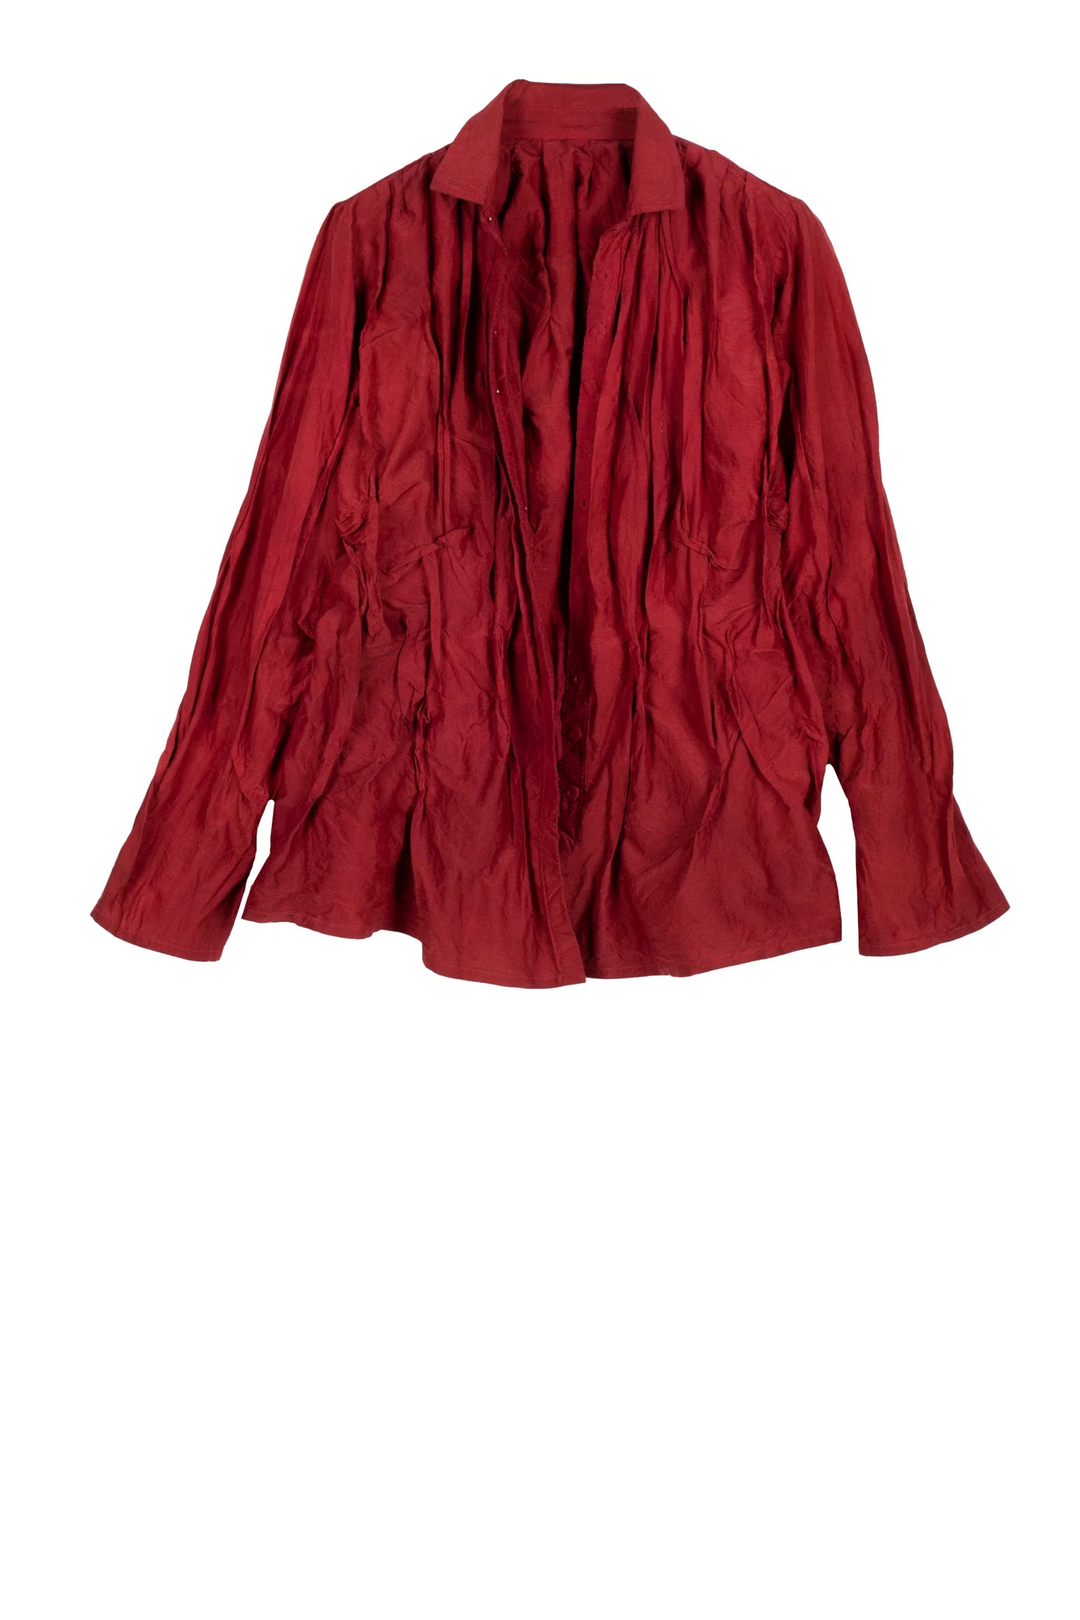 DYED COTTON SILK HEAVY VOILE WAVY TUCKED SHIRT - dh1541-red -